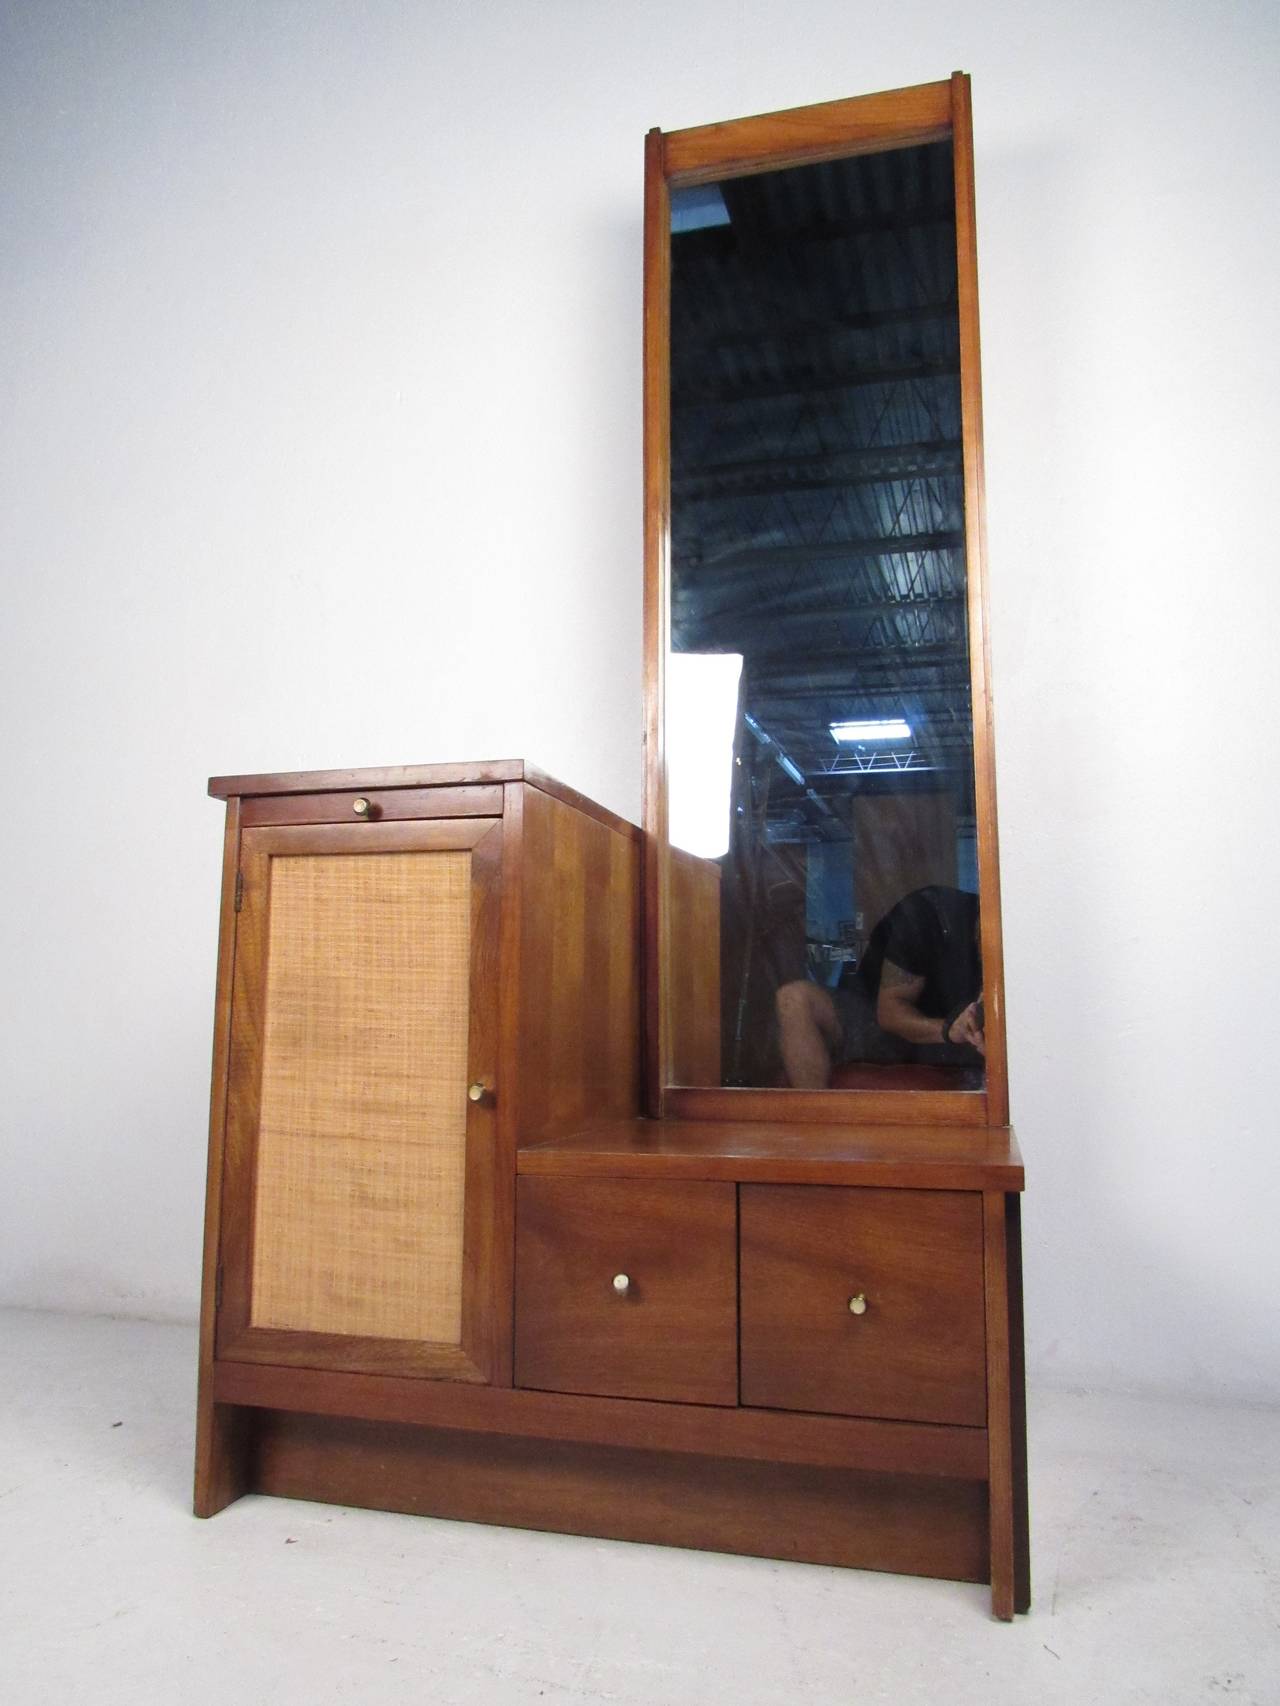 This Mid-Century cabinet features a beautiful walnut finish, cane front, tall mirror, pull-out surface with white finish, and two drawers with unique pulls which offer a modern flare to any home or office space.

Please confirm item location (NY